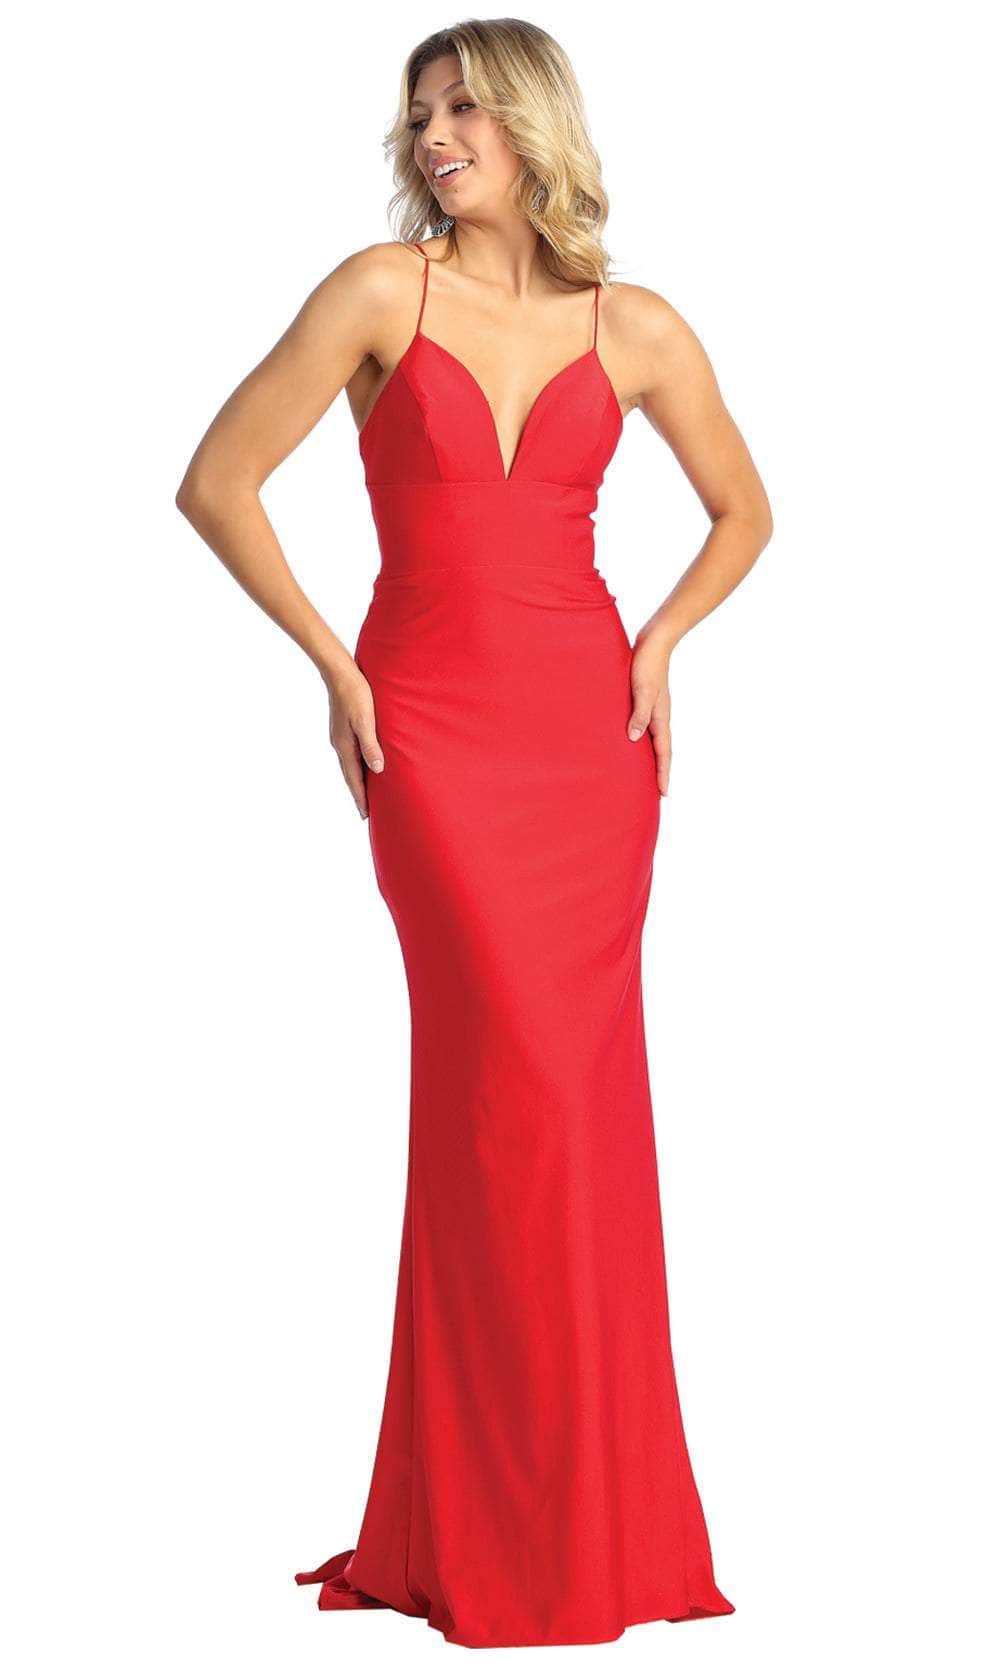 May Queen MQ1925 - Deep V-Neck Sheath Evening Gown Evening Dresses 2 / Red